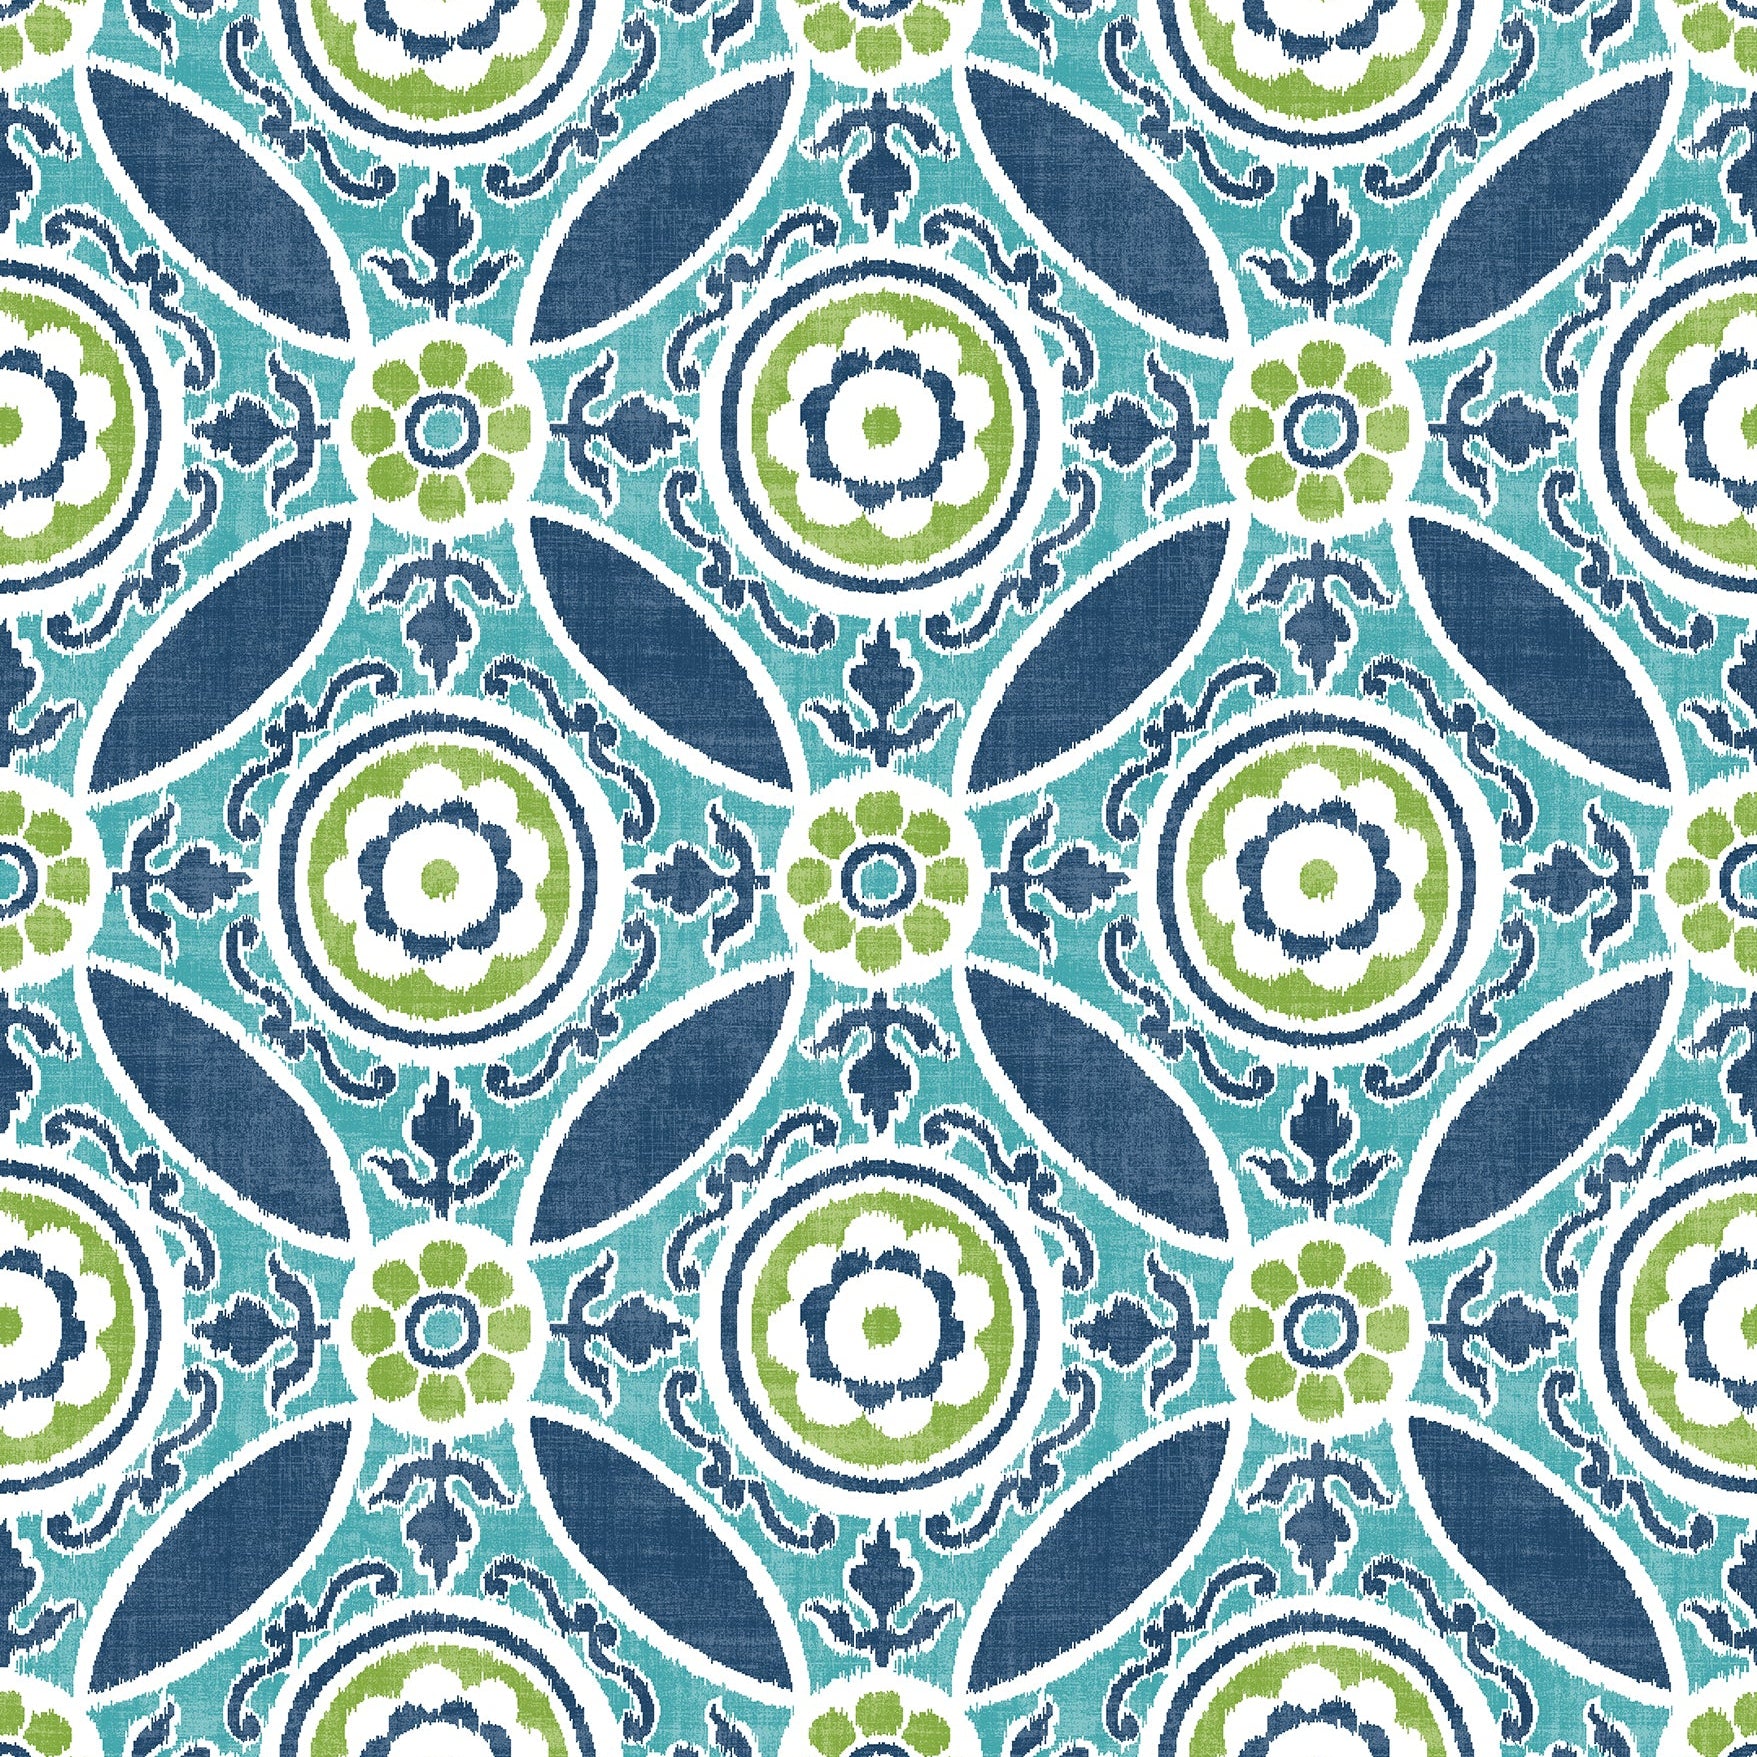 Looking for 2744-24115 Solstice Teal Flowers A-Street Prints Wallpaper